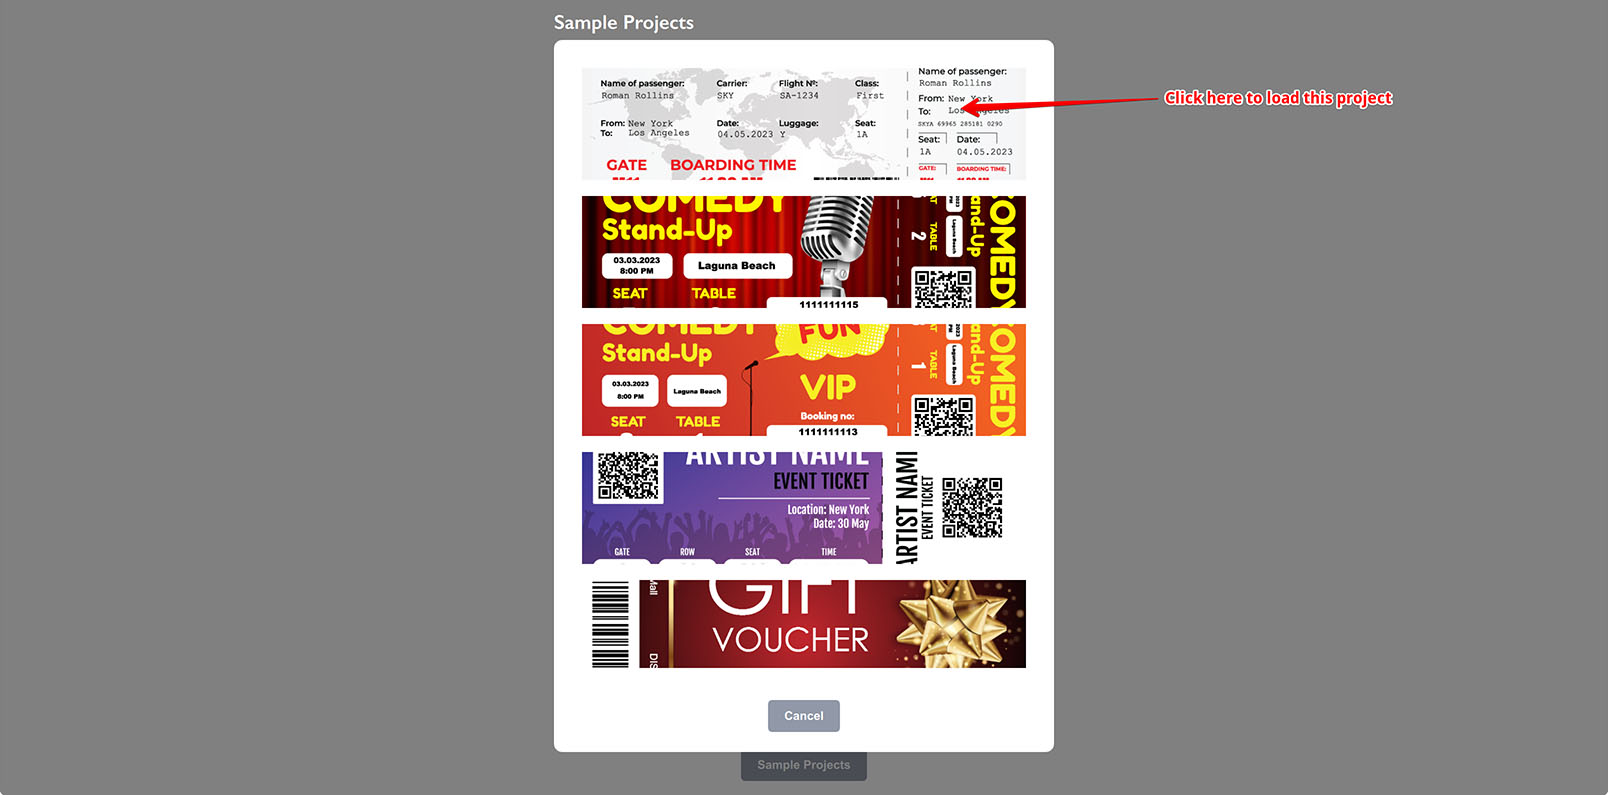 Ticket Wizard sample projects